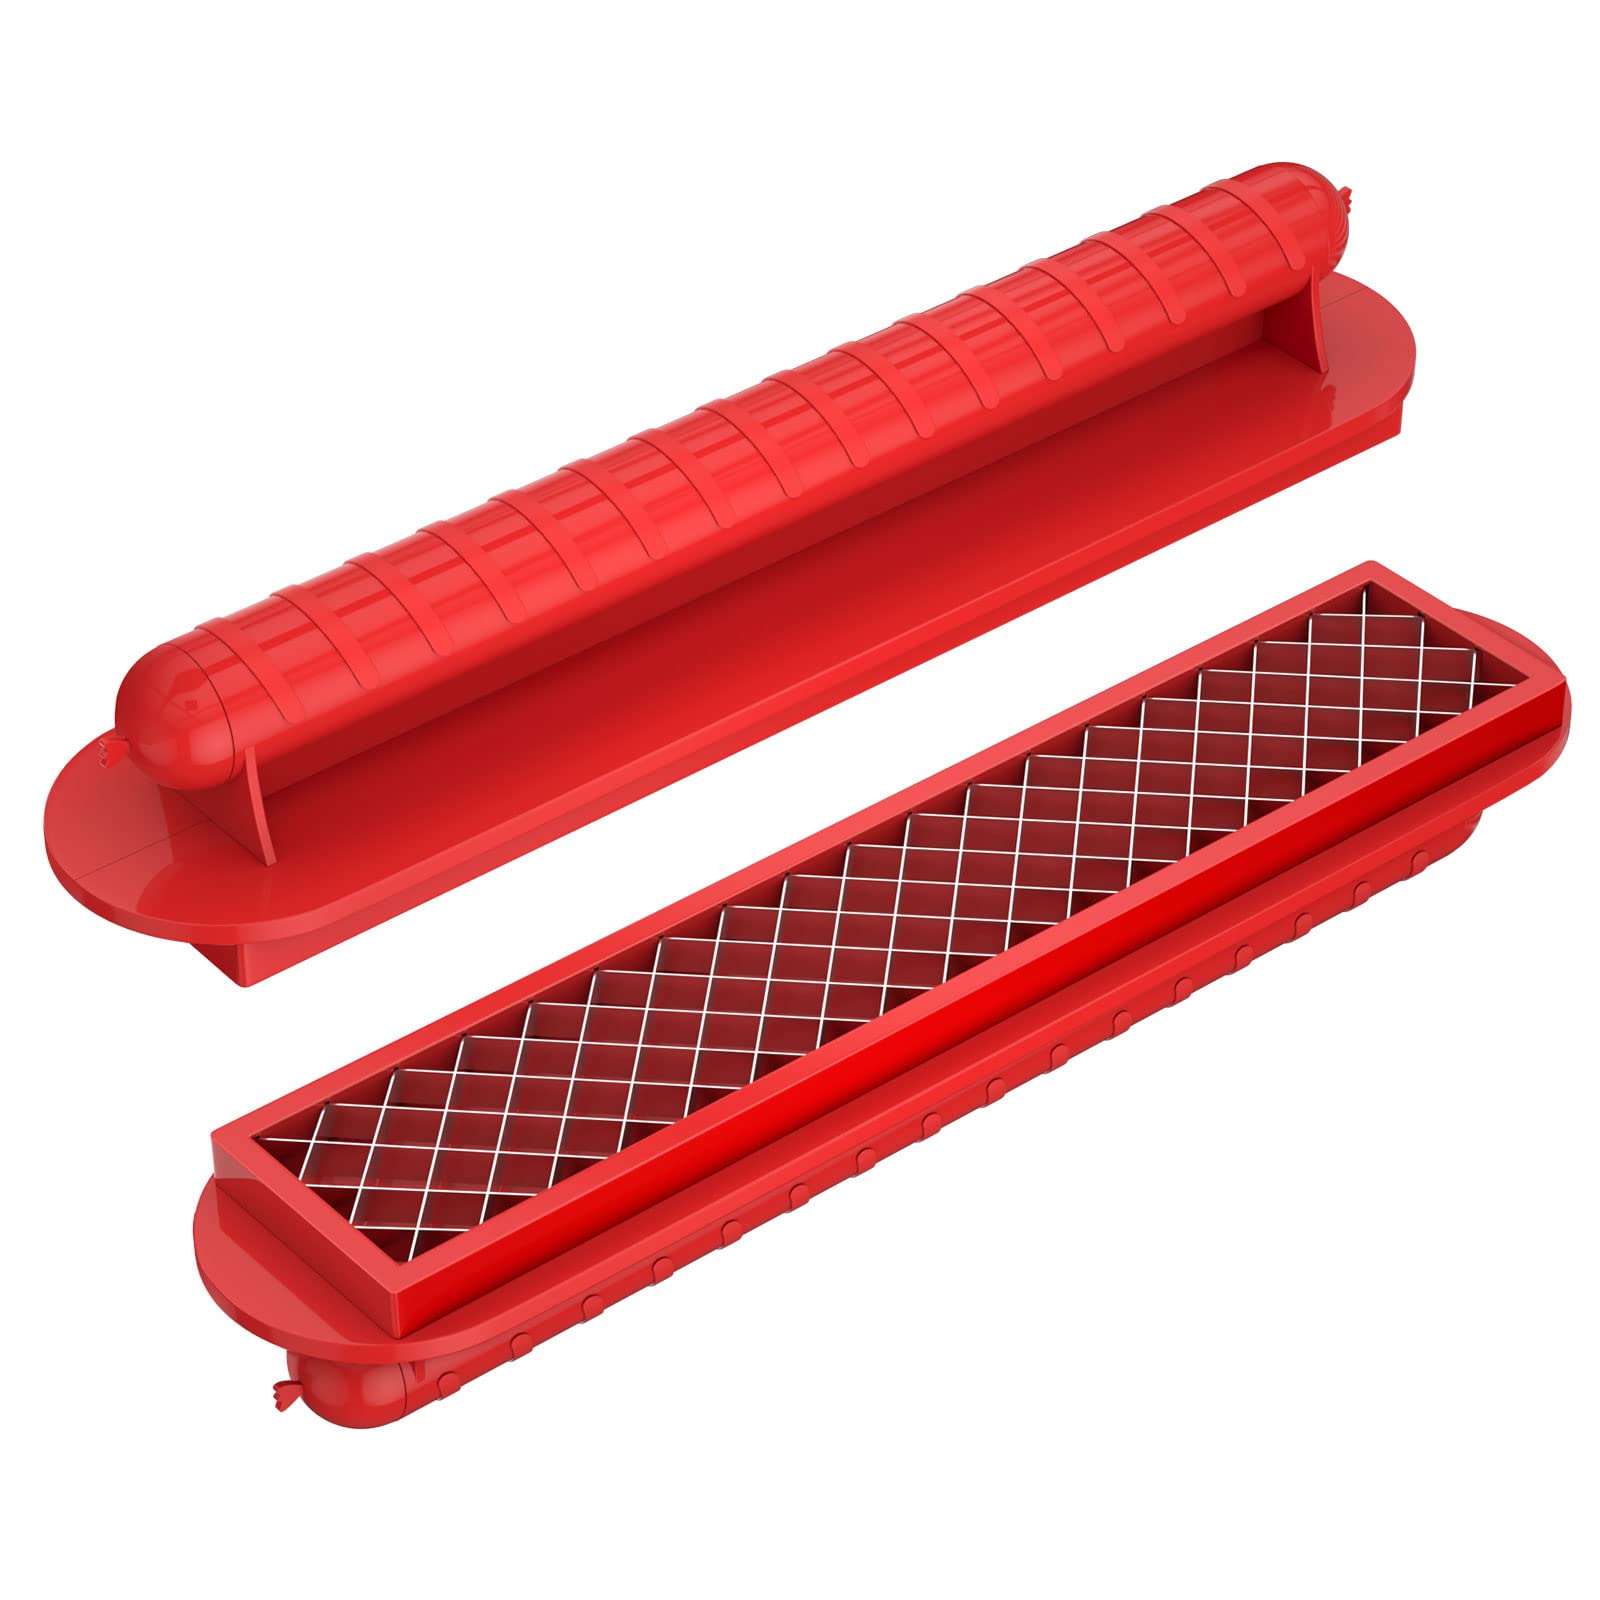 (🎄Christmas Hot Sale🔥🔥)Hotdogs Slicer Slices Perfect Criss-Cross Slots